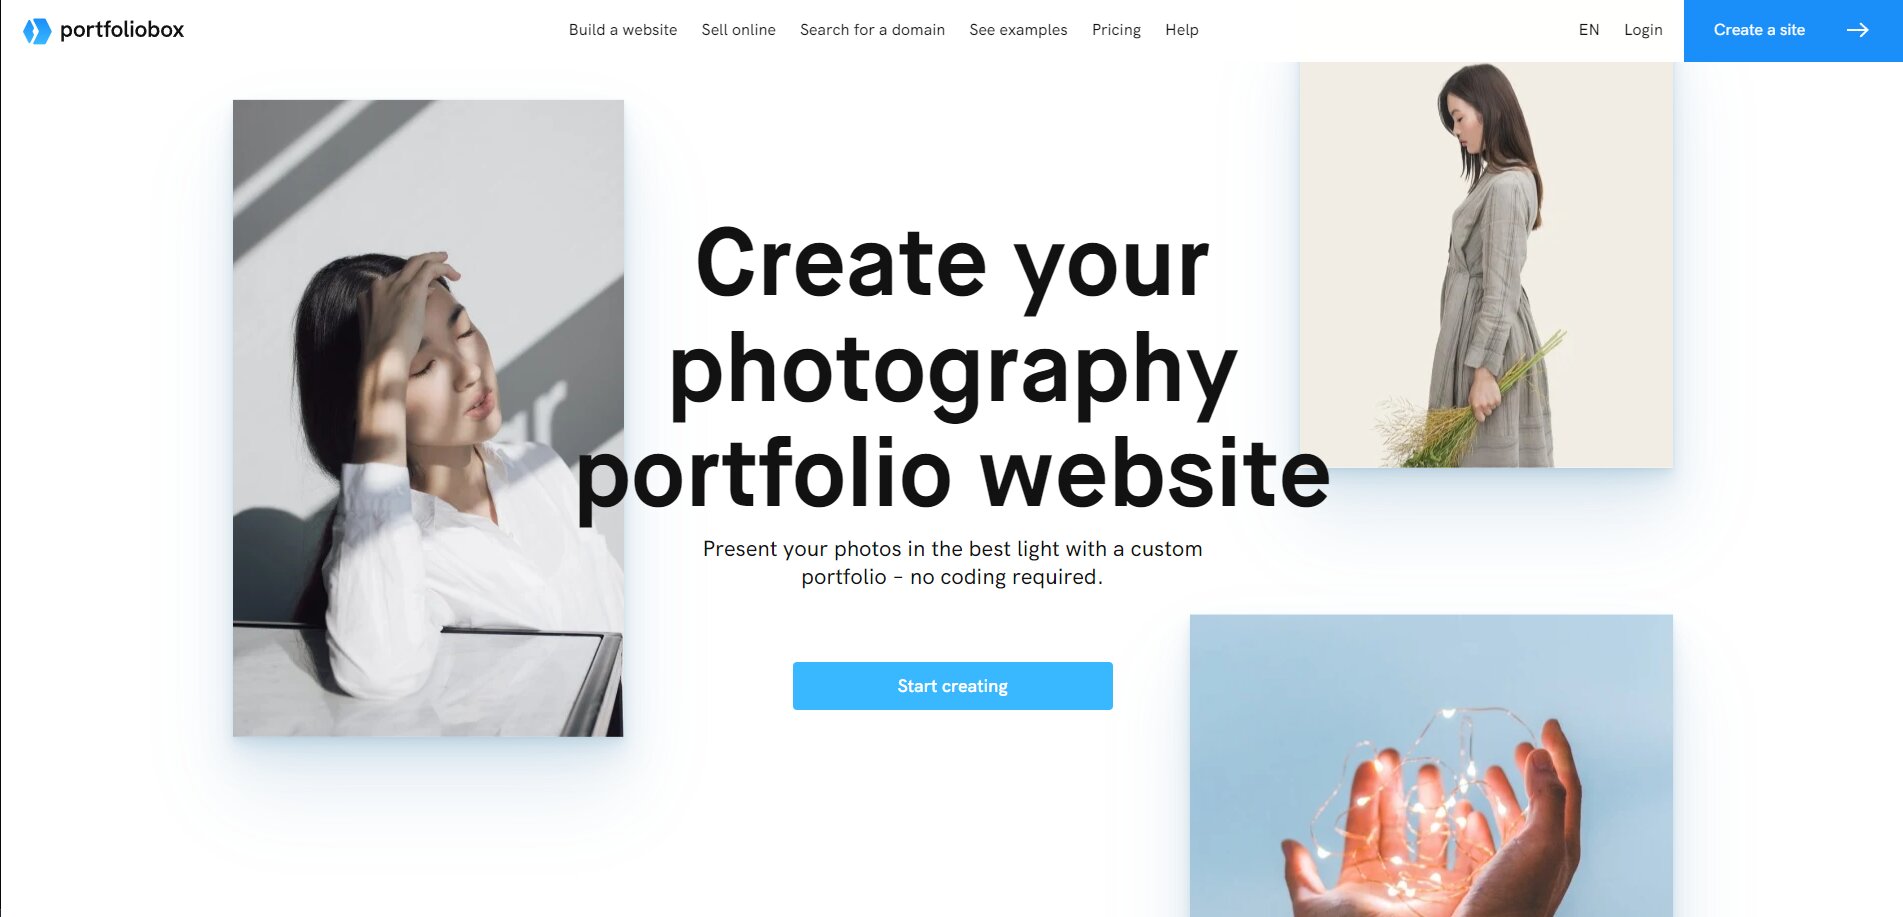 how to build an online photography portfolio